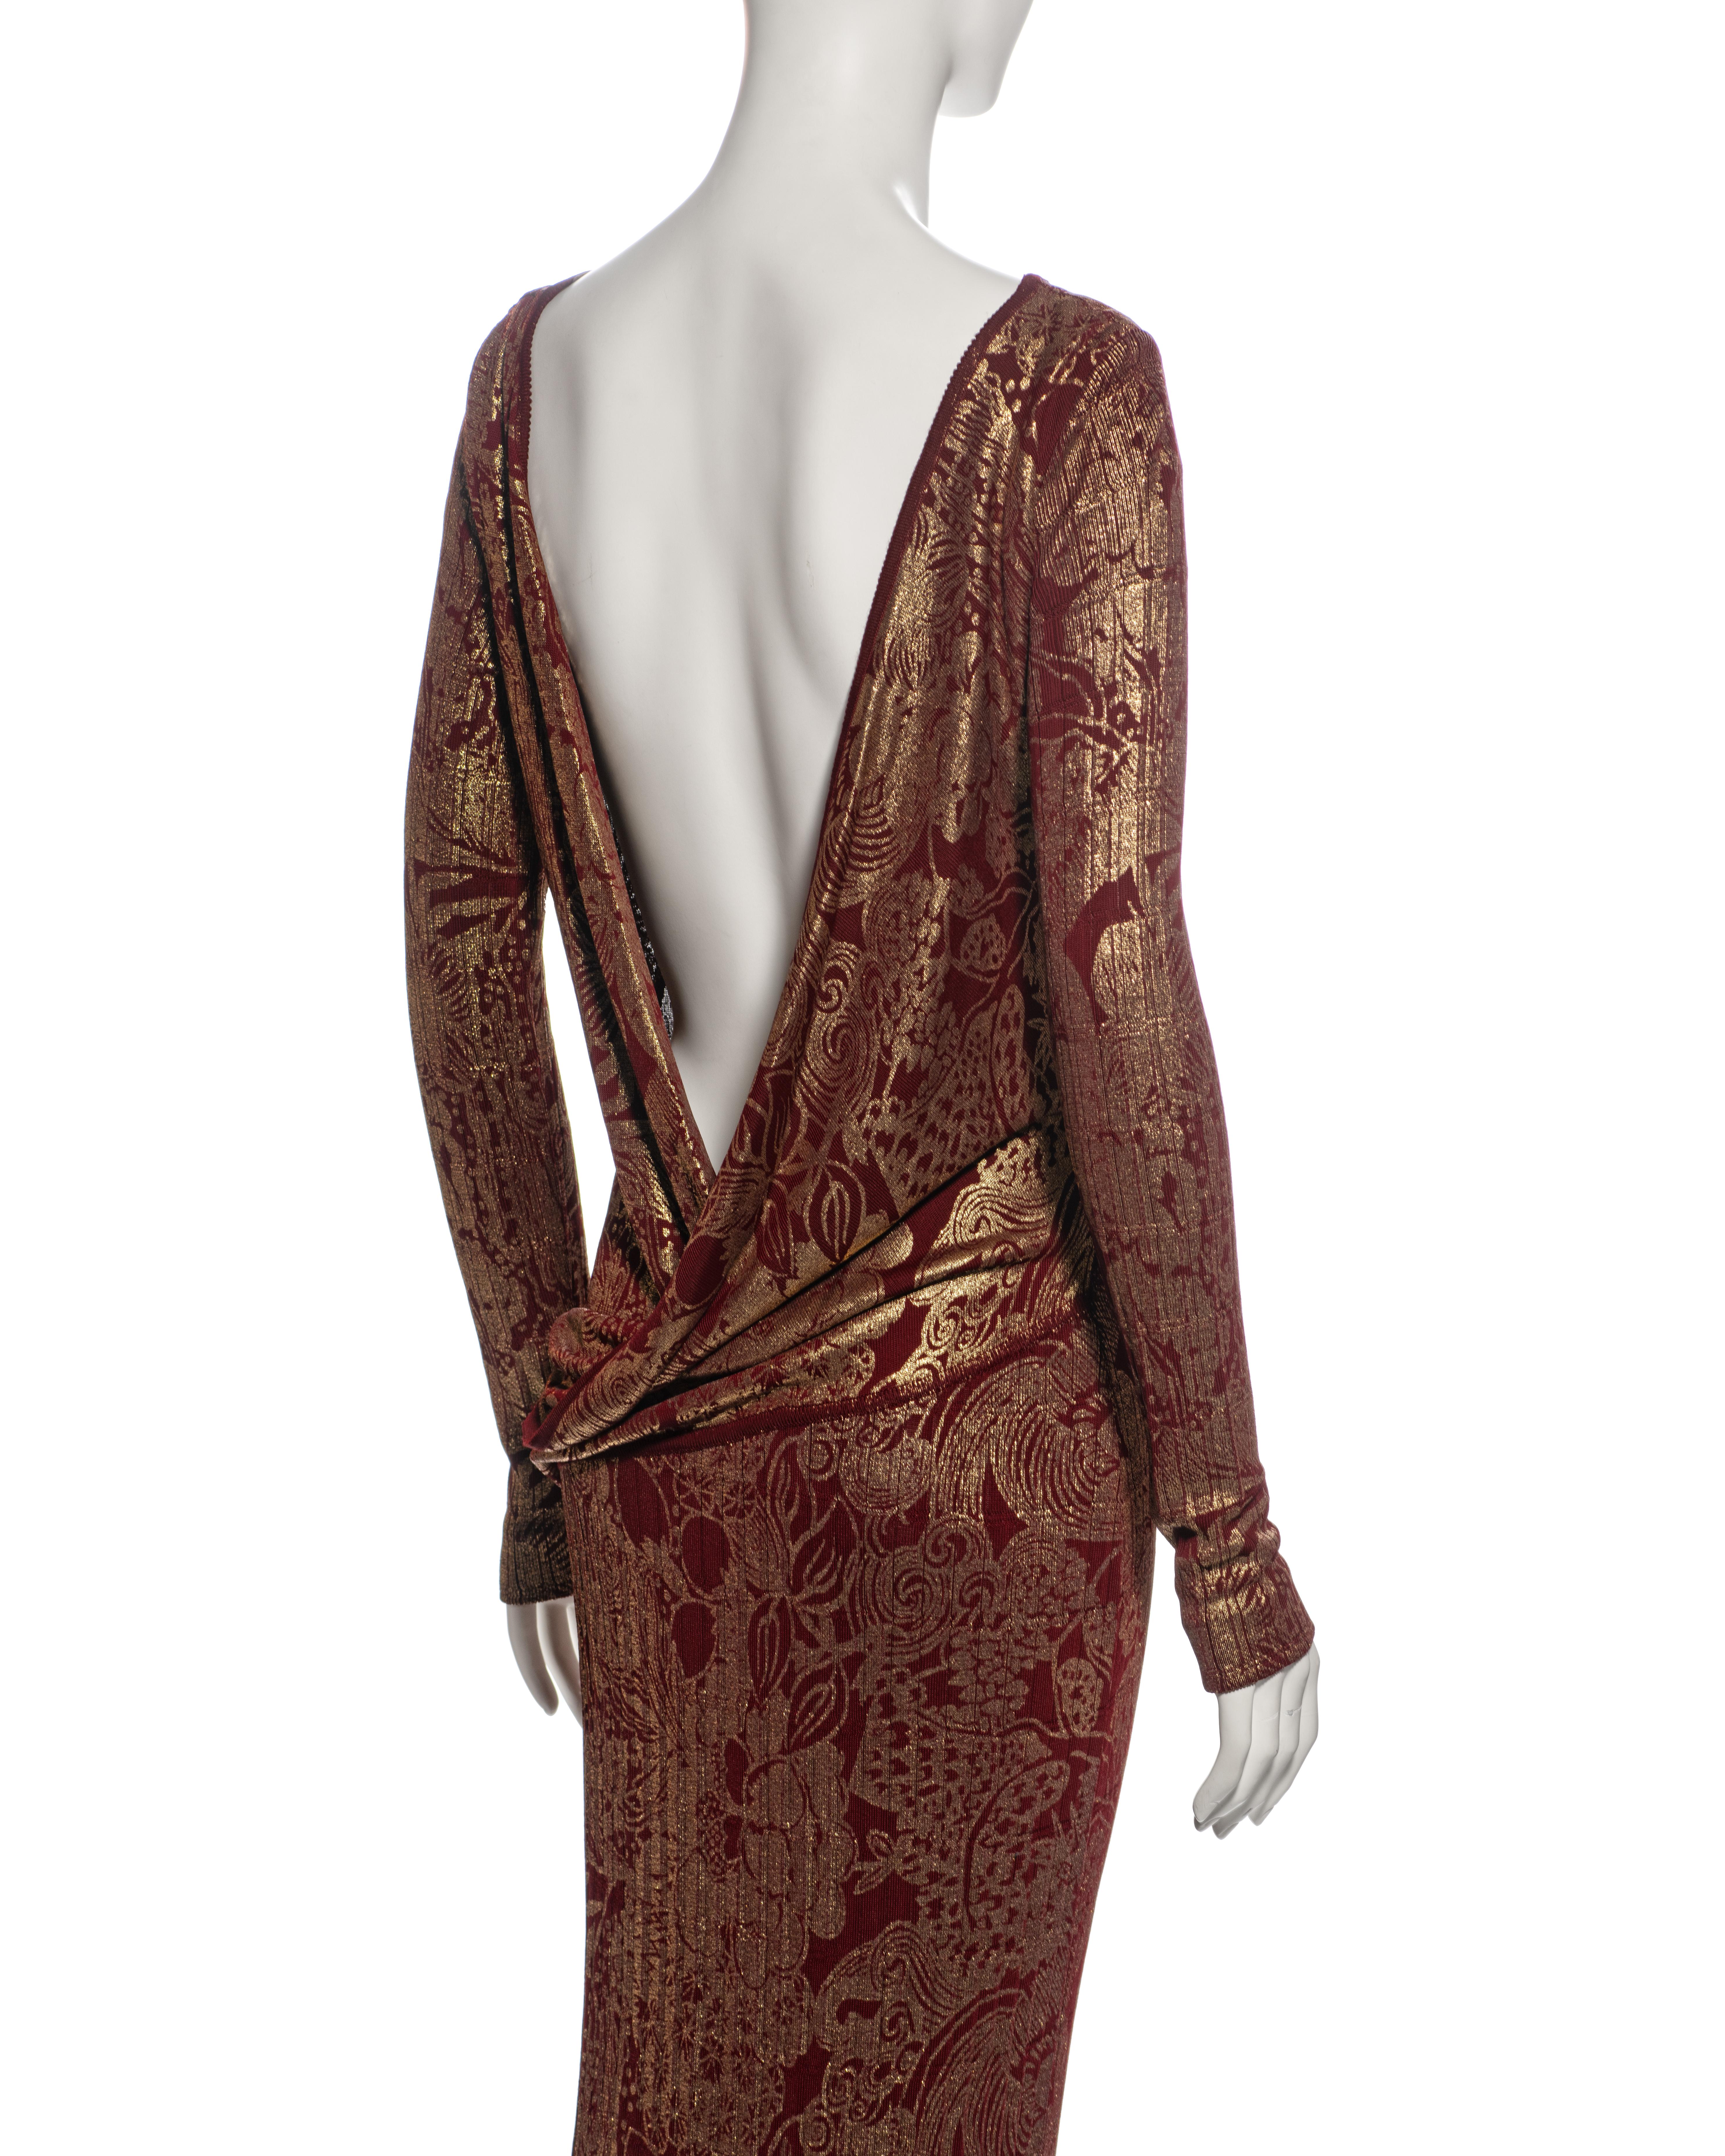 John Galliano Bordeaux Knit Evening Dress with Gold Foil Floral Print, fw 1998 For Sale 4